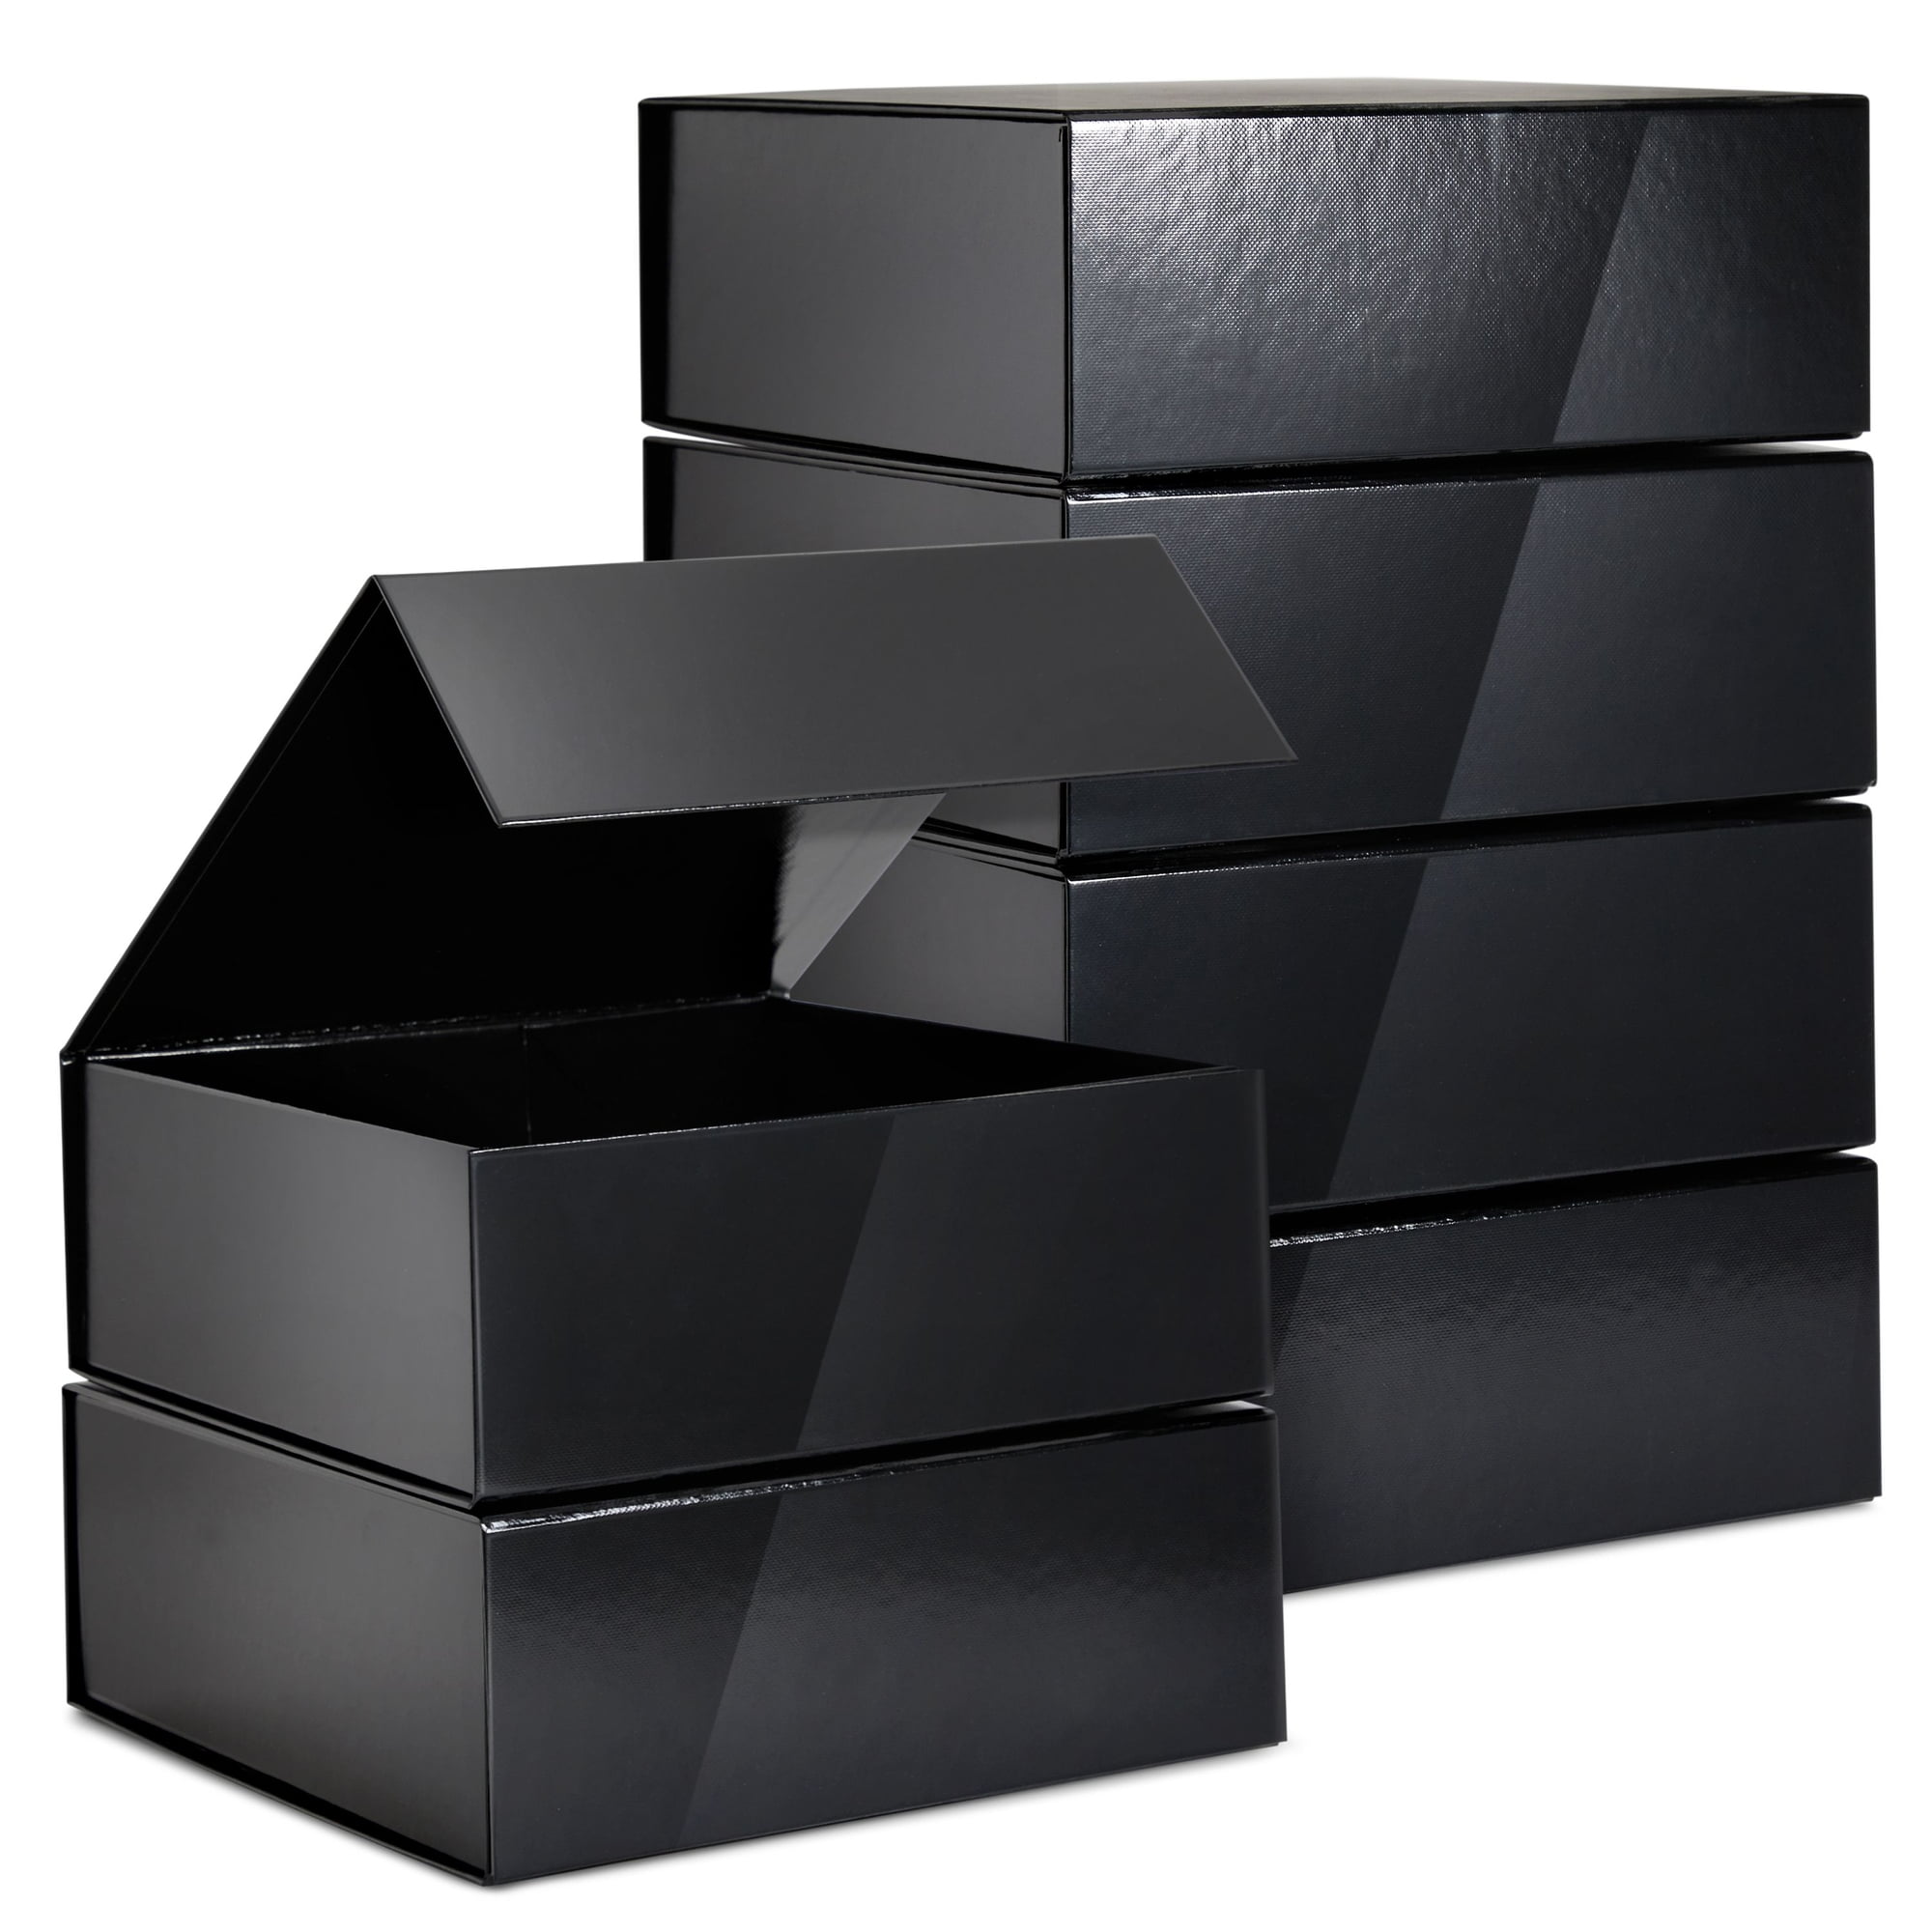  GLEAVI 4pcs Boxes Gift Box Square Gift Bridesmaid Gift Black  Suit Bejeweled Kit Black Wedding Decor Bulk Items for Gifts Bulk Gift  Present Wrapping Accessories Paper Proposal Cosmetic : Health 